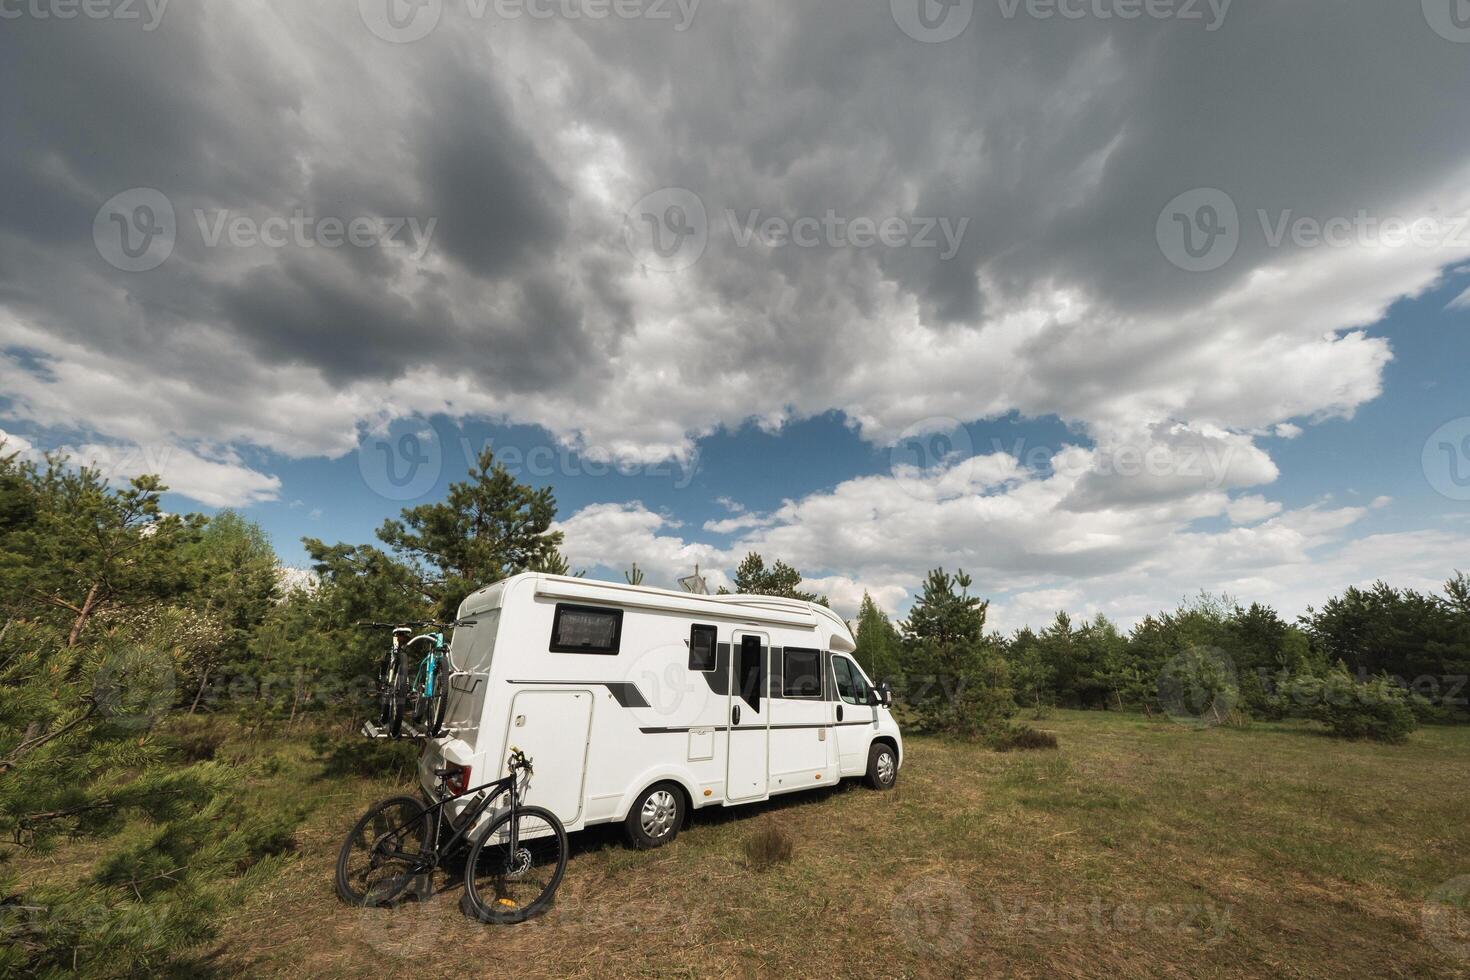 a vacation trip in a motorhome, a rest in a van photo